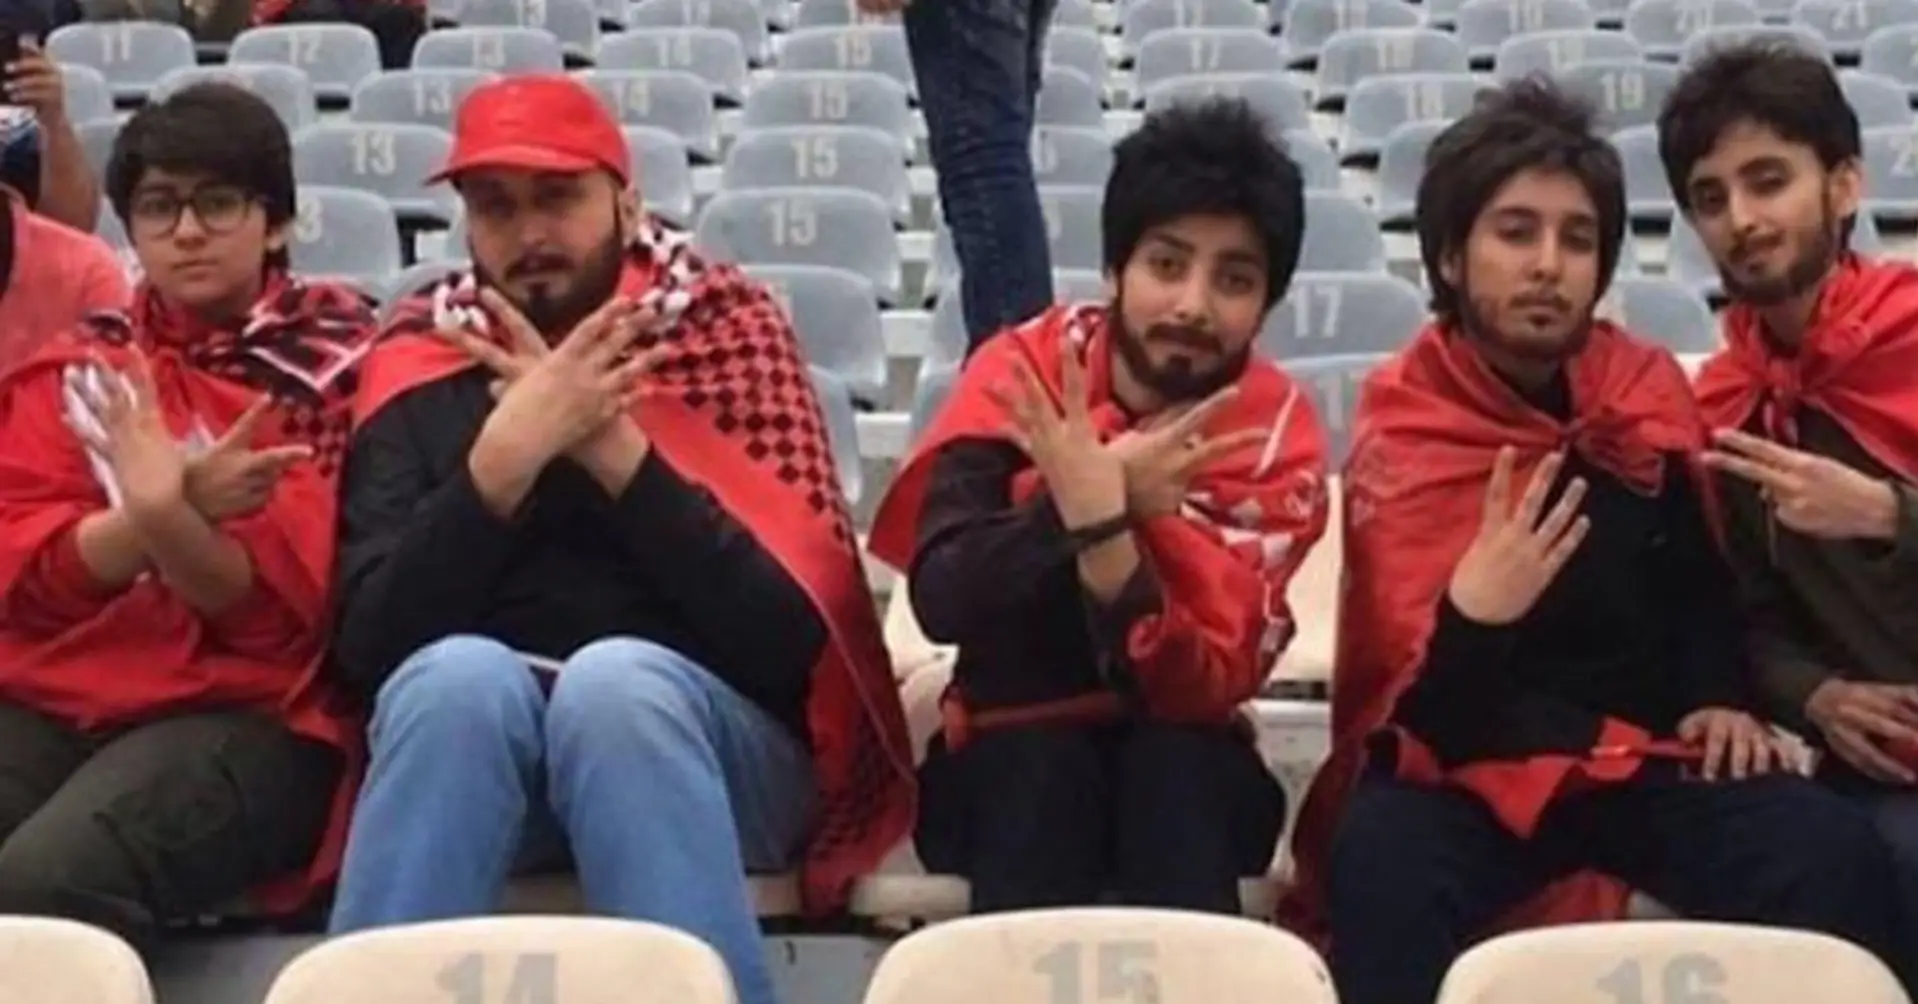 Women are not allowed to attend football games in Iran - but these 5 brave boys totally enjoyed a game 